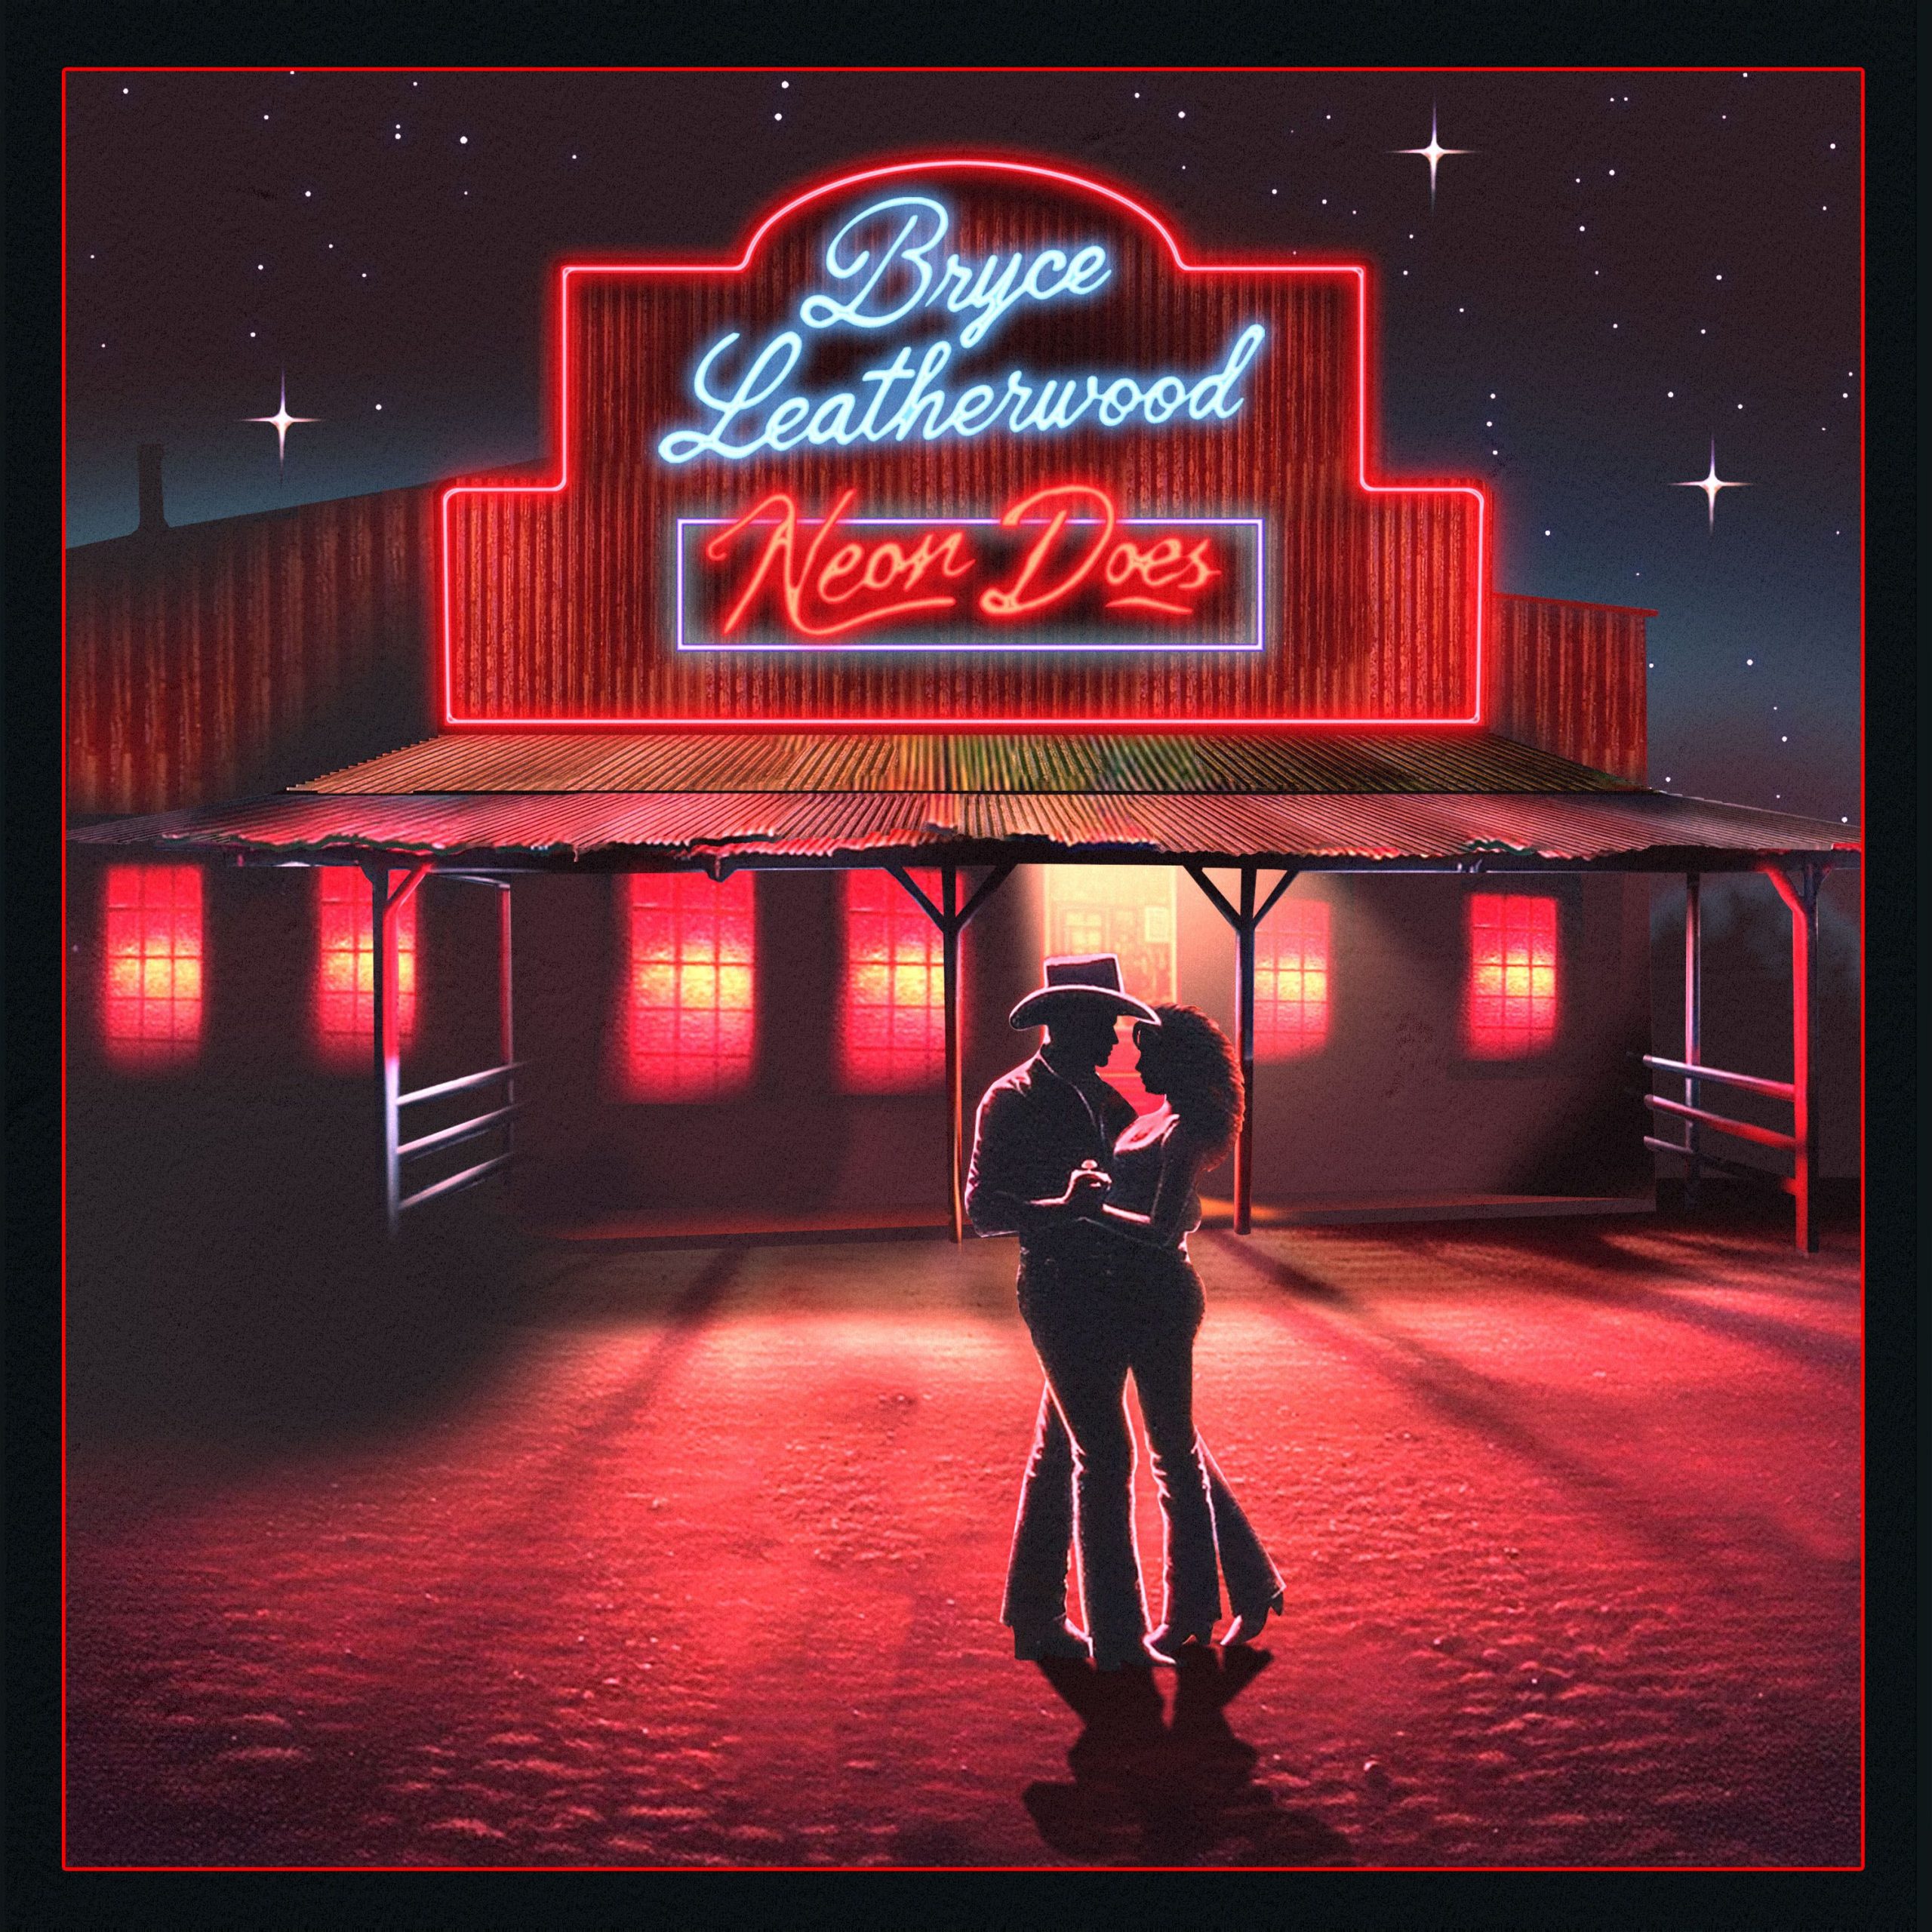 BRYCE LEATHERWOOD SETS TONE OF WHAT’S TO COME WITH “NEON DOES”